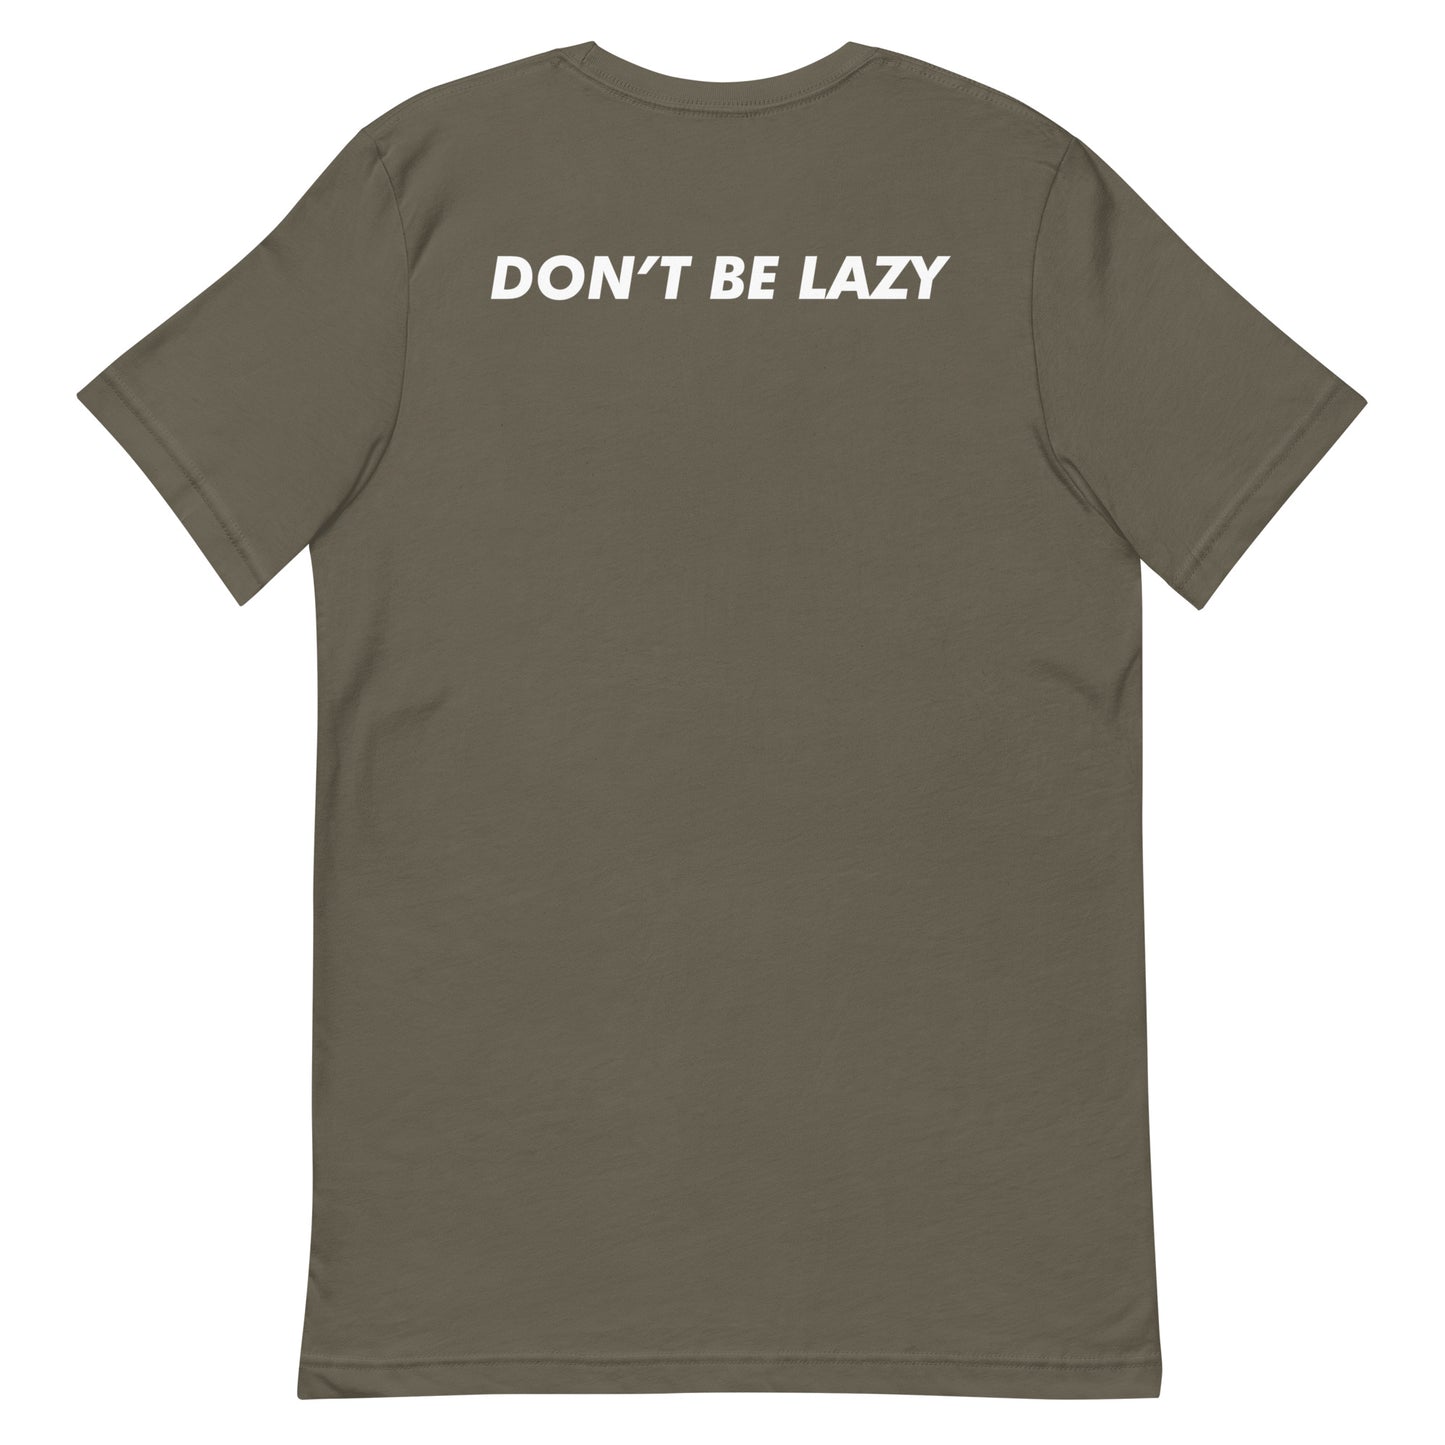 CHASING EDGES DON'T BE LAZY T-SHIRT (MORE COLORS)